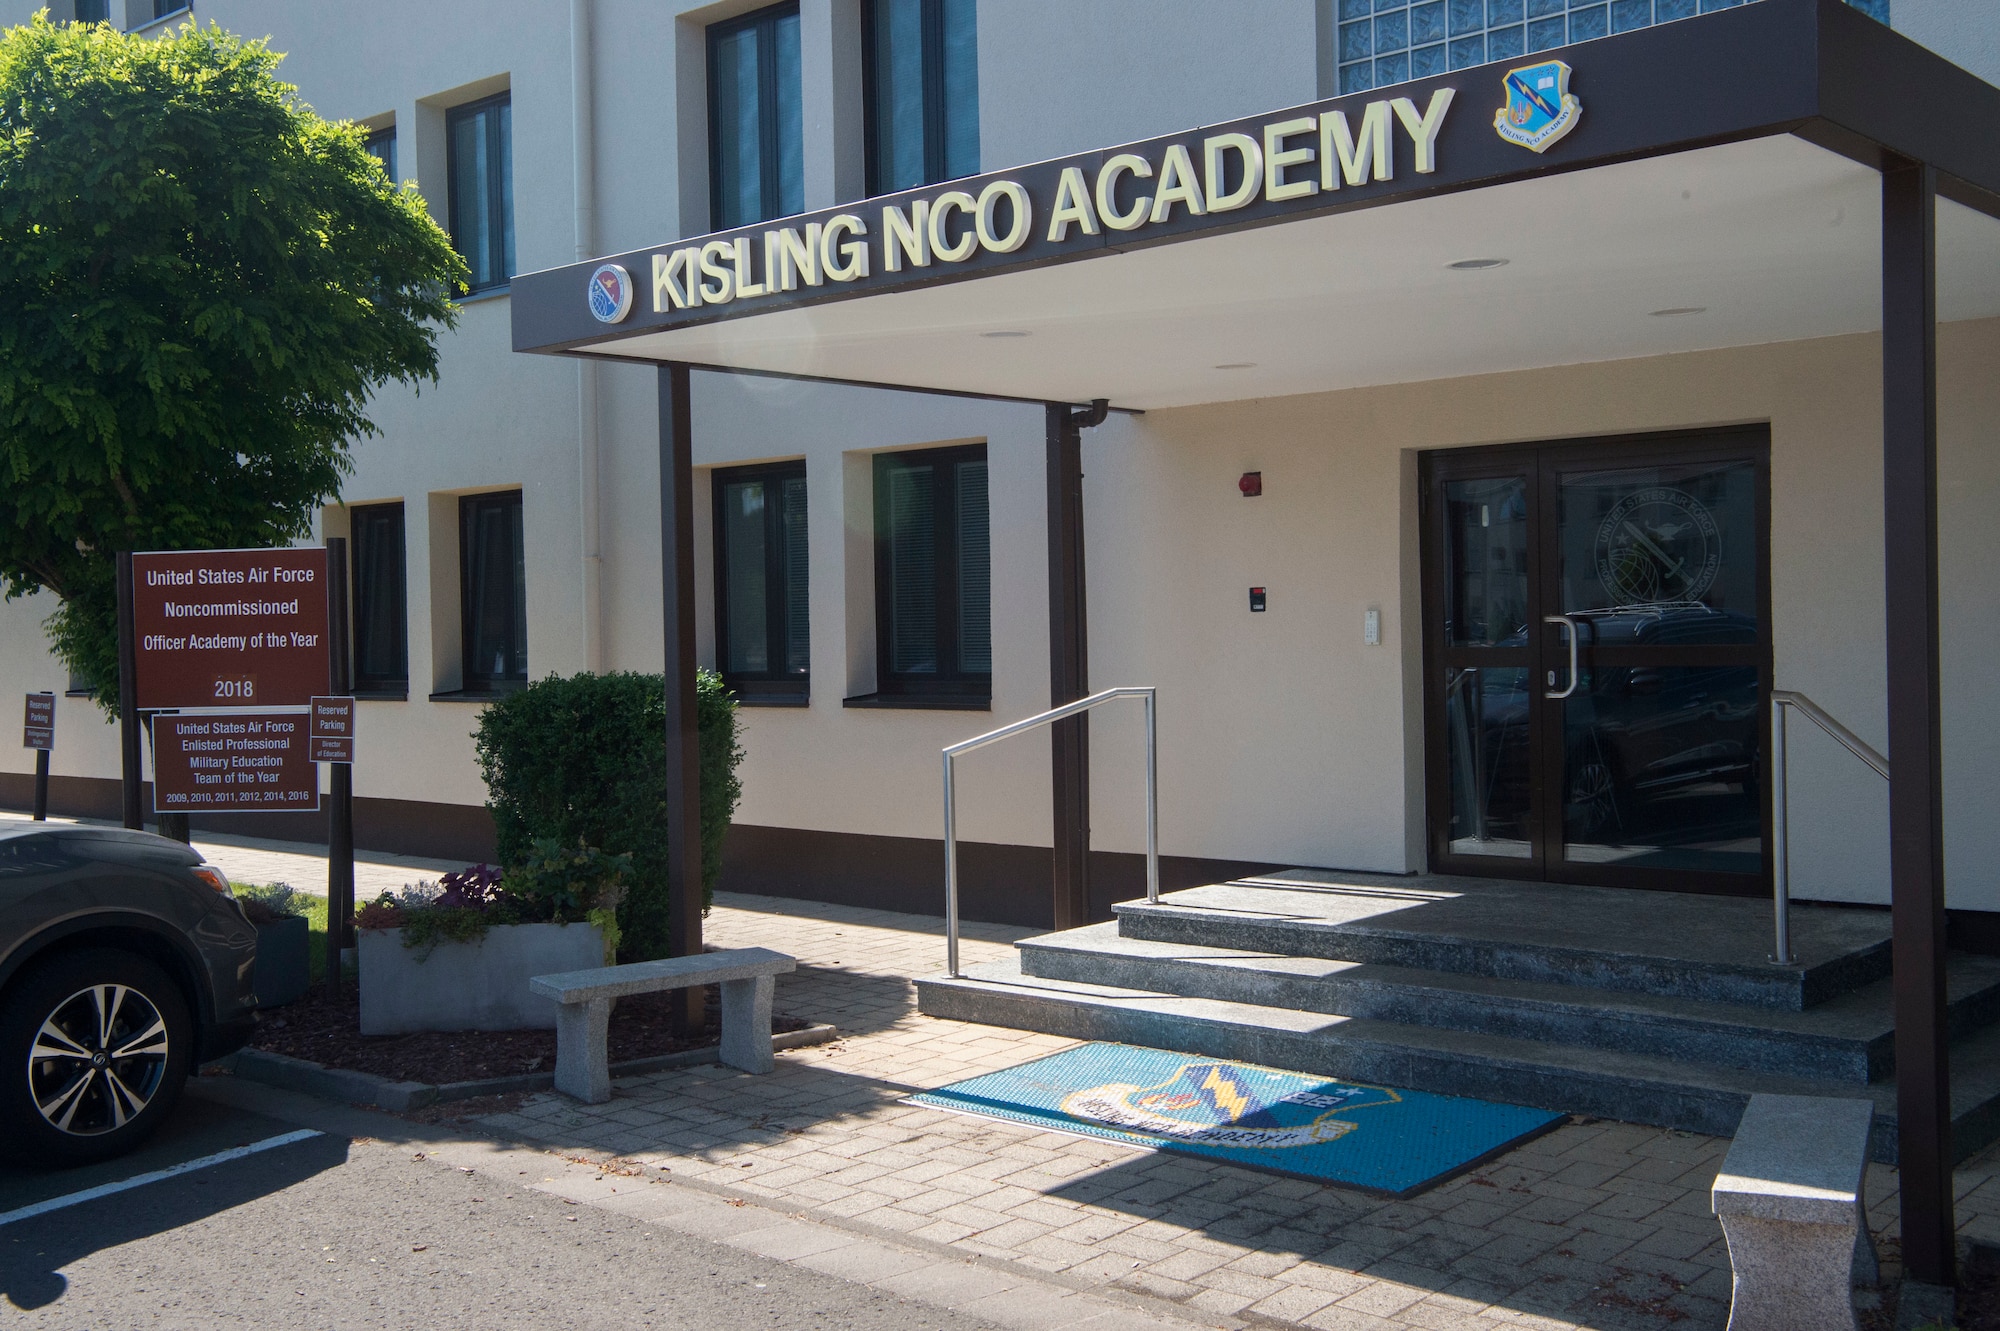 Pictured is the main entrance to the Kisling Noncommissioned Officer Academy, Kapaun Air Station, Germany, June 12, 2020. The academy cadre transitioned their in-residence course to a virtual platform due to COVID-19 restrictions, and will begin the first online course, June 15, 2020. (U.S. Air Force photo by Tech. Sgt. Stephen Ocenosak)